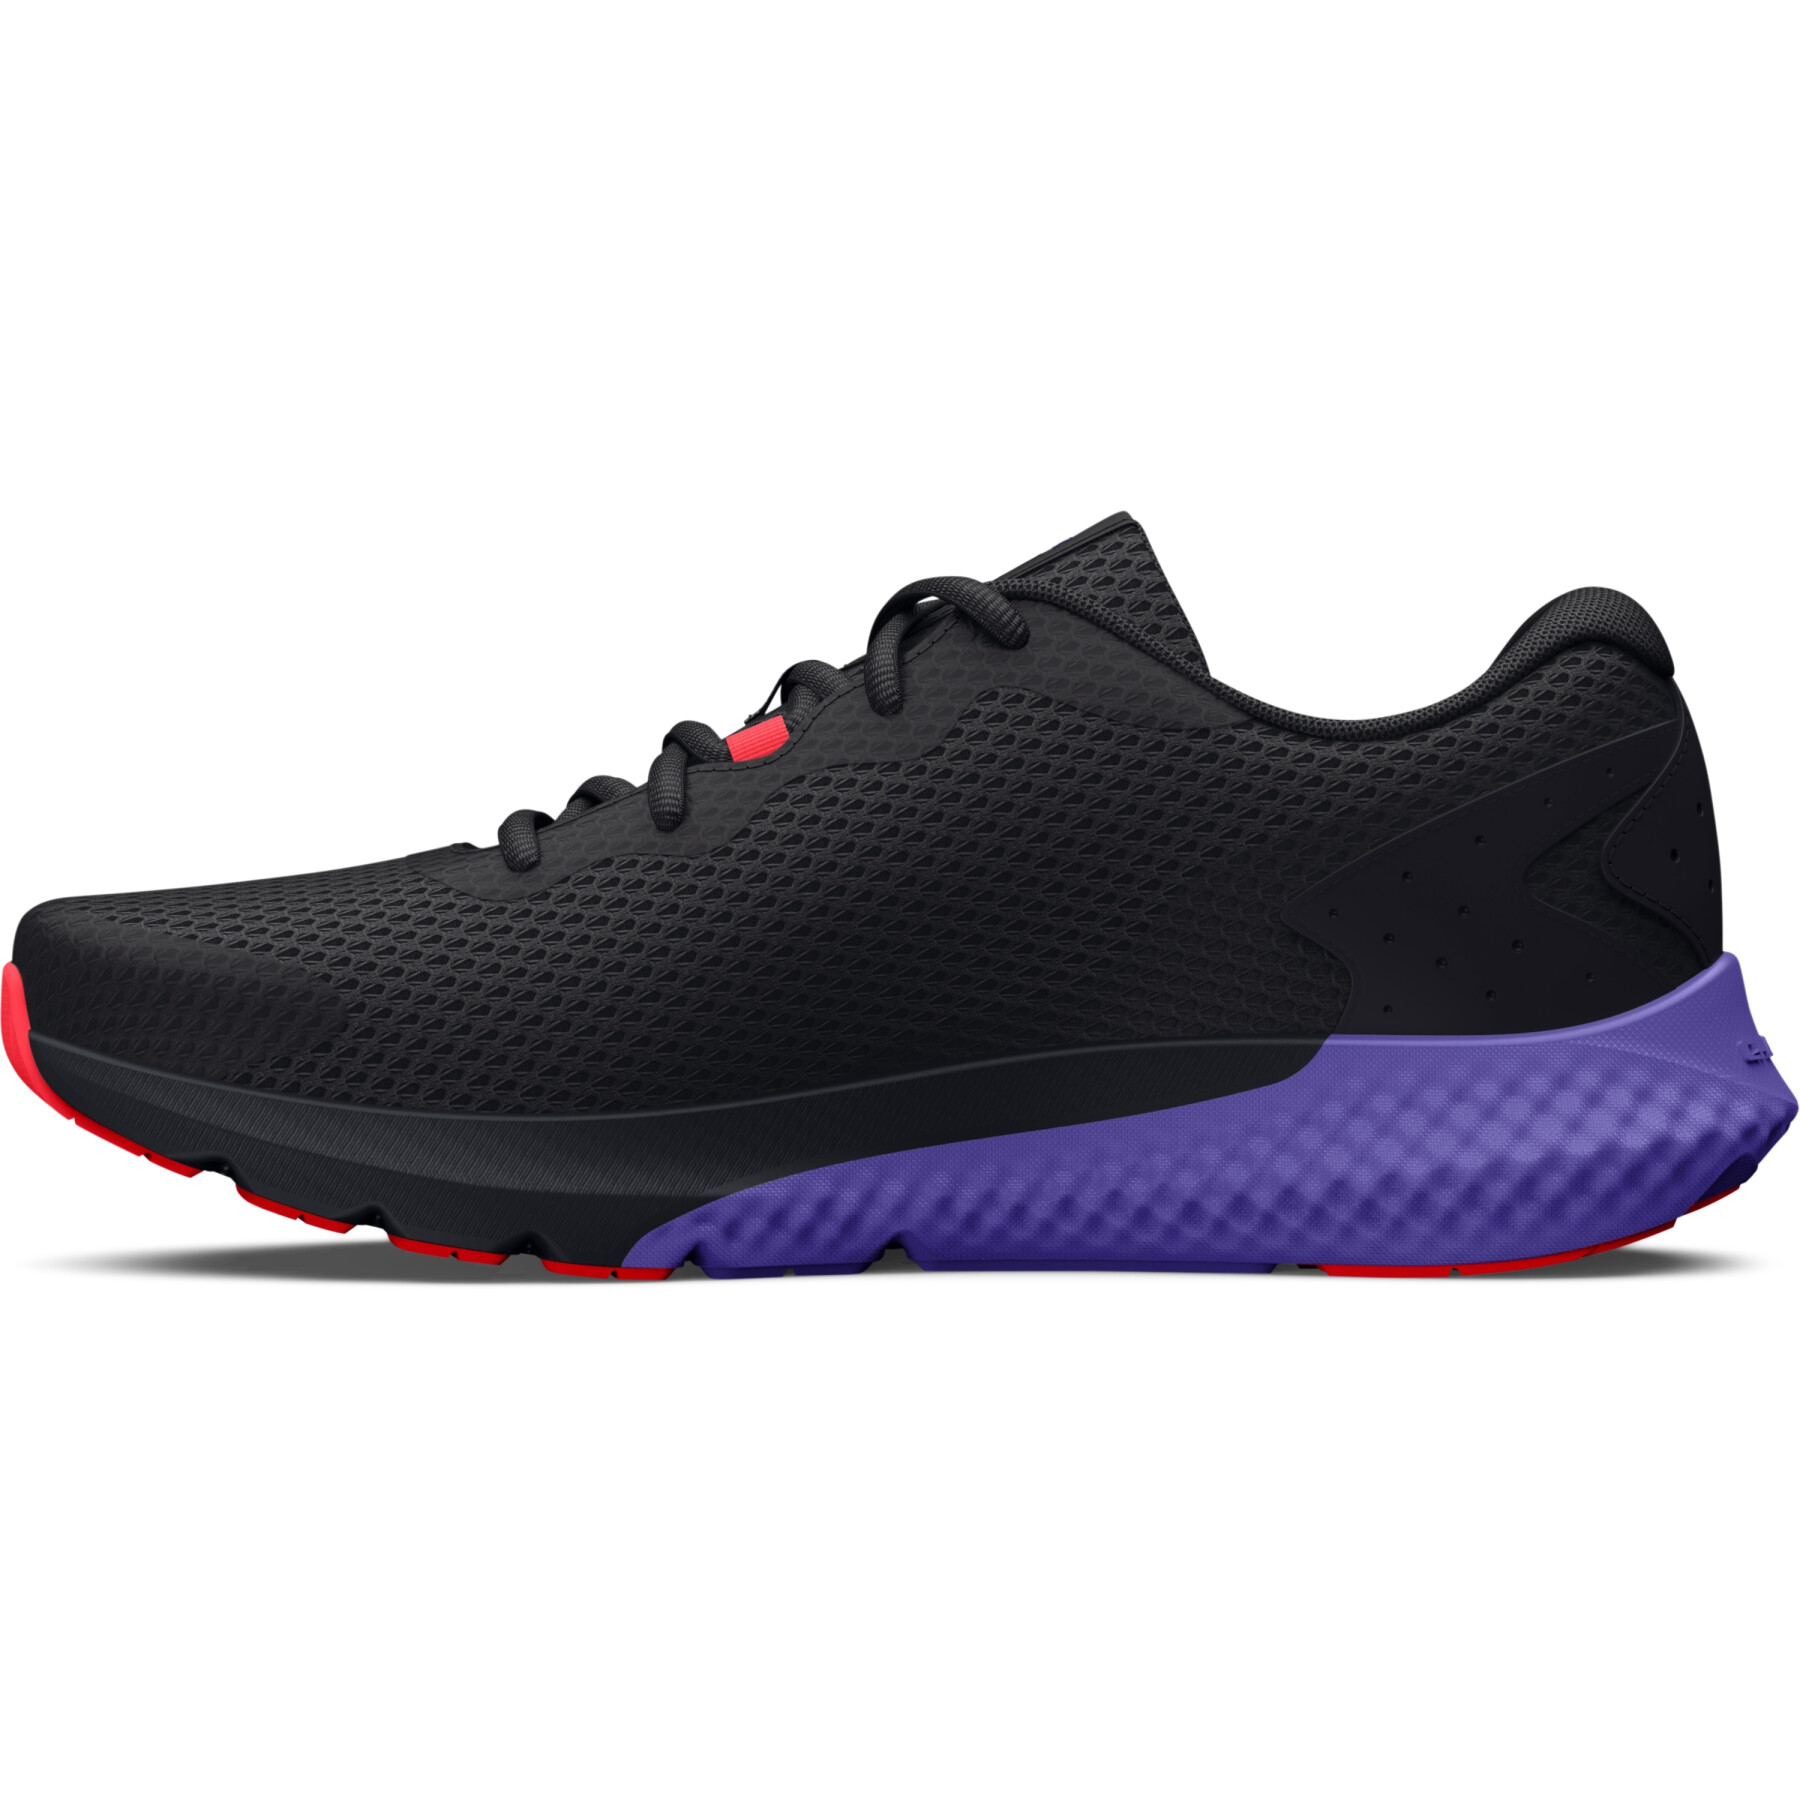 Zapatillas de running mujer Under Armour Charged Rogue 3